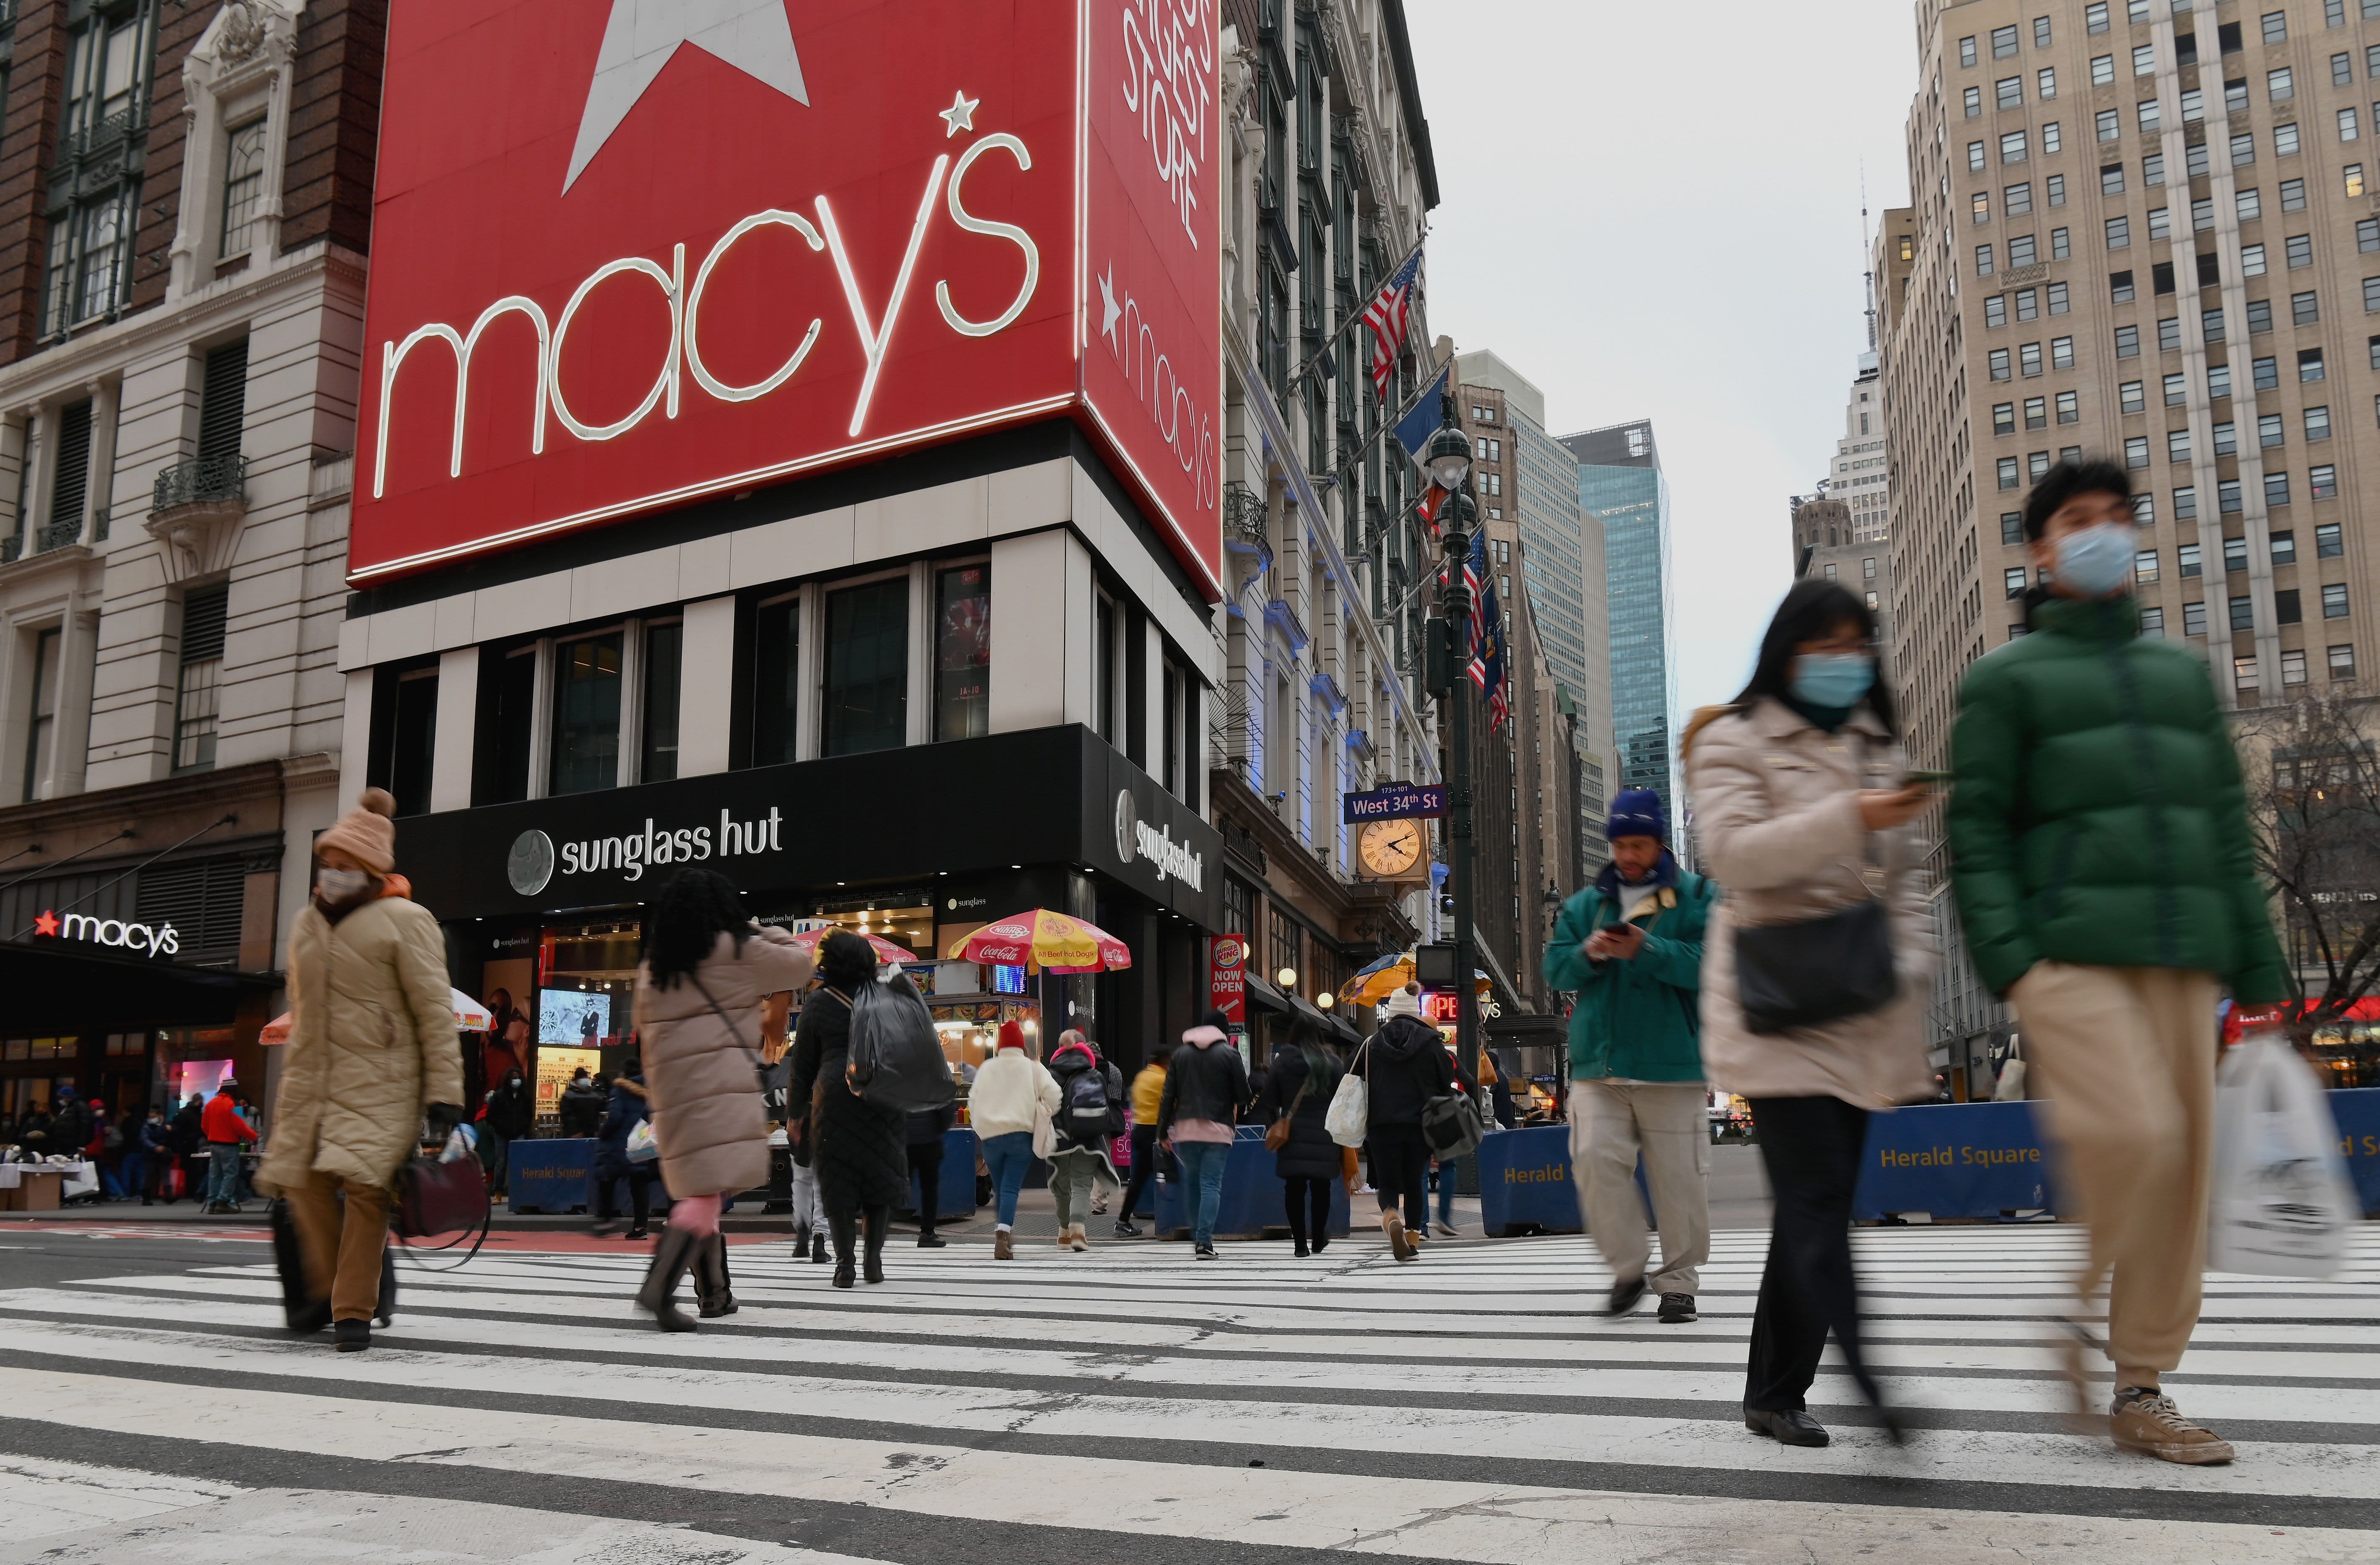 Macy’s (M) reports earnings in the fourth quarter of 2020, with sales higher